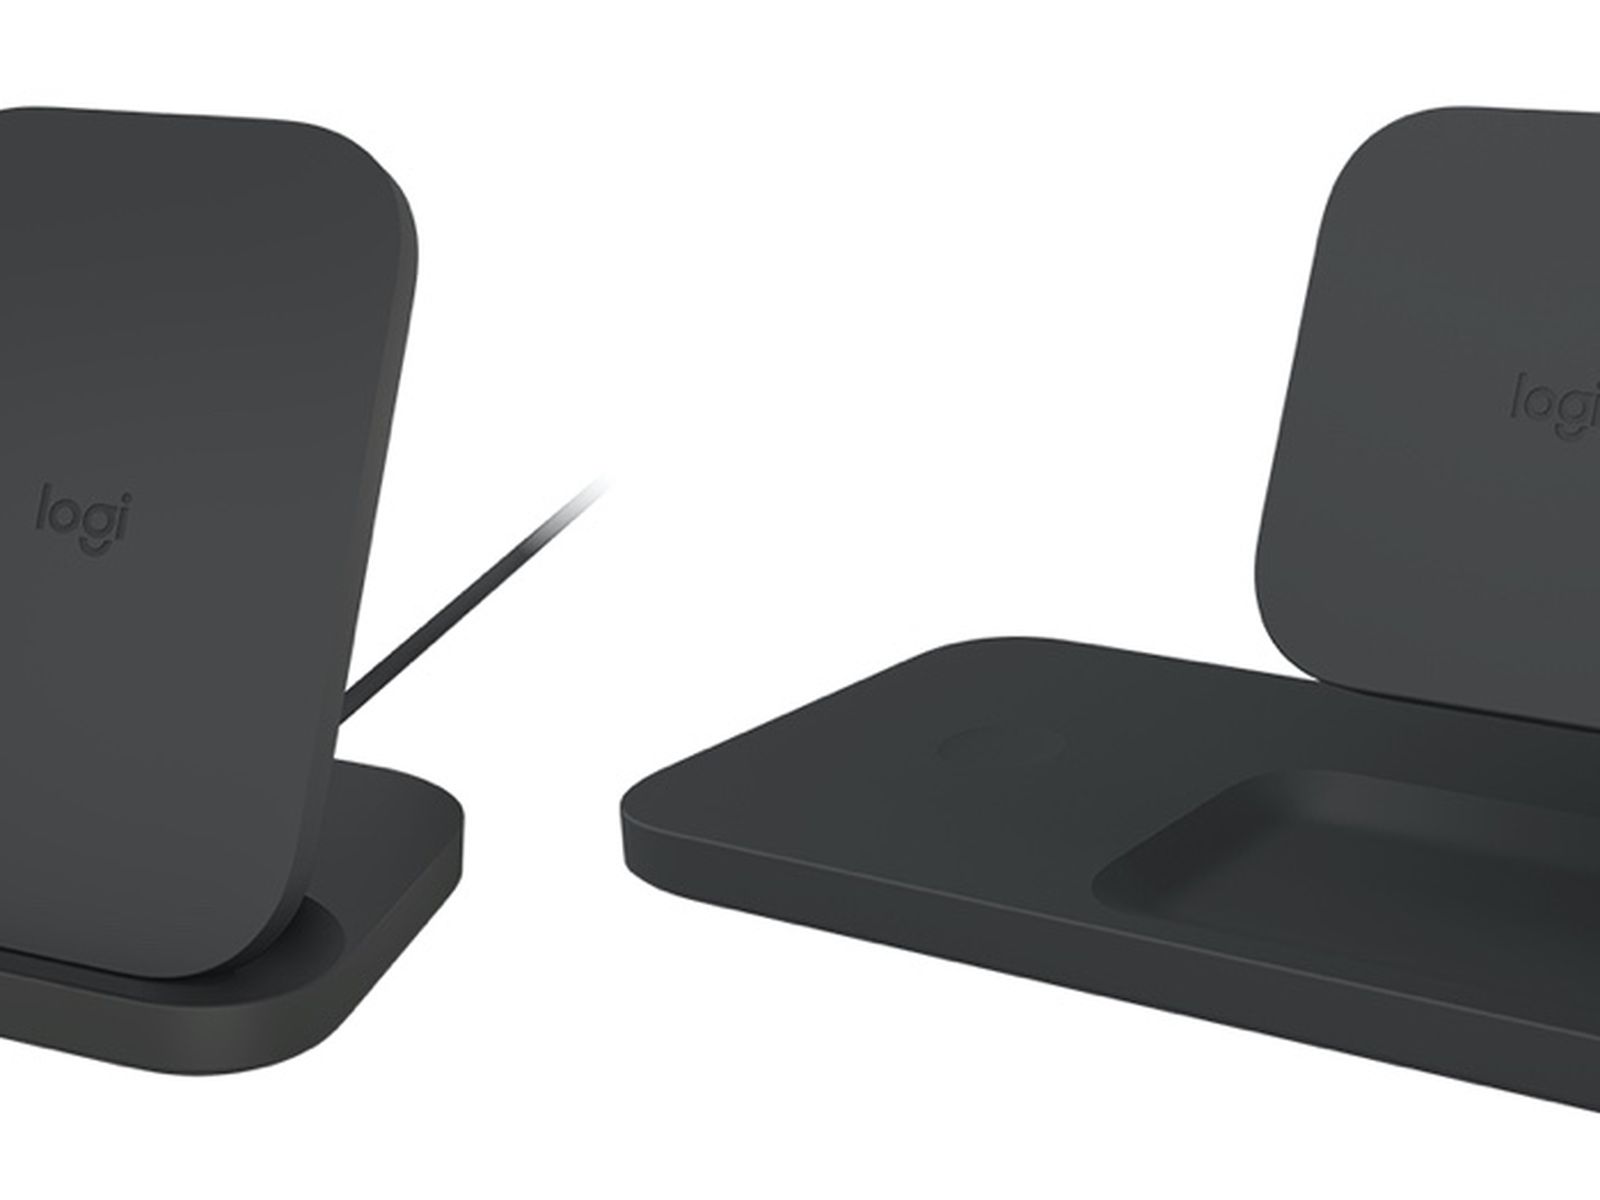 Logitech Launches New POWERED Dock for Wirelessly Charging iPhone, AirPods Apple Watch - MacRumors